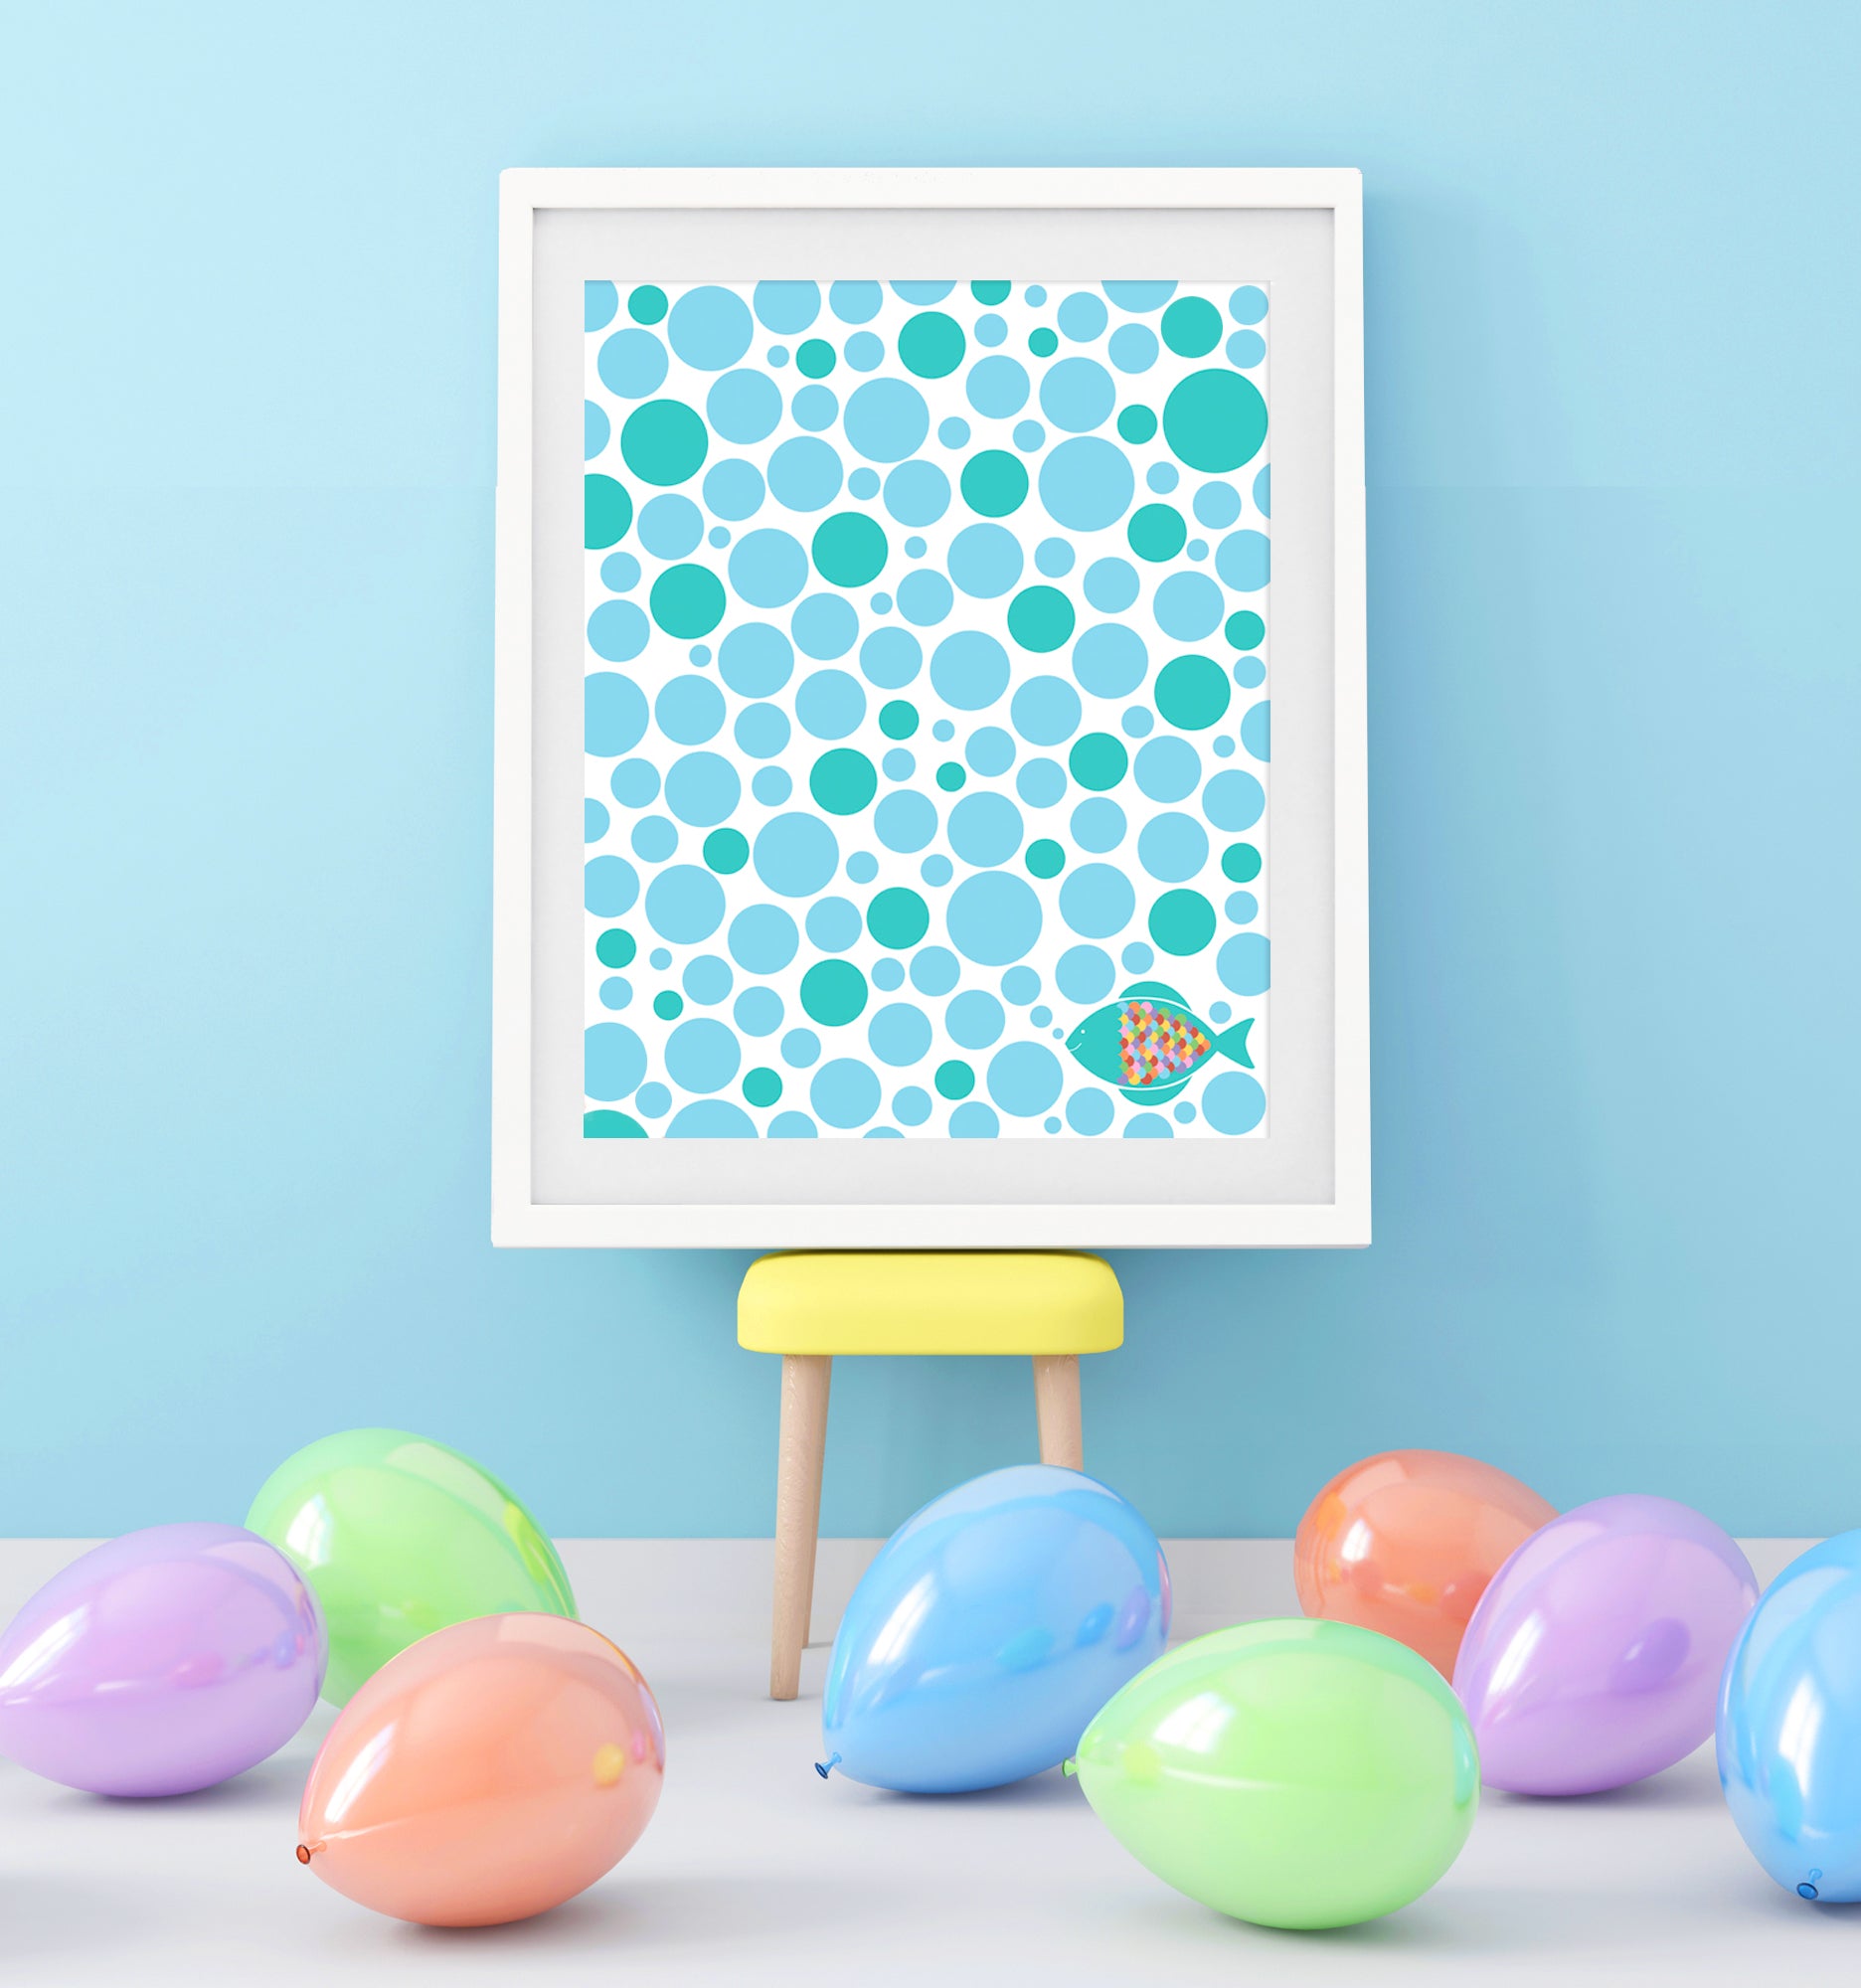 blue party room with balloons and poster in the middle with fish design with lots of bubbles